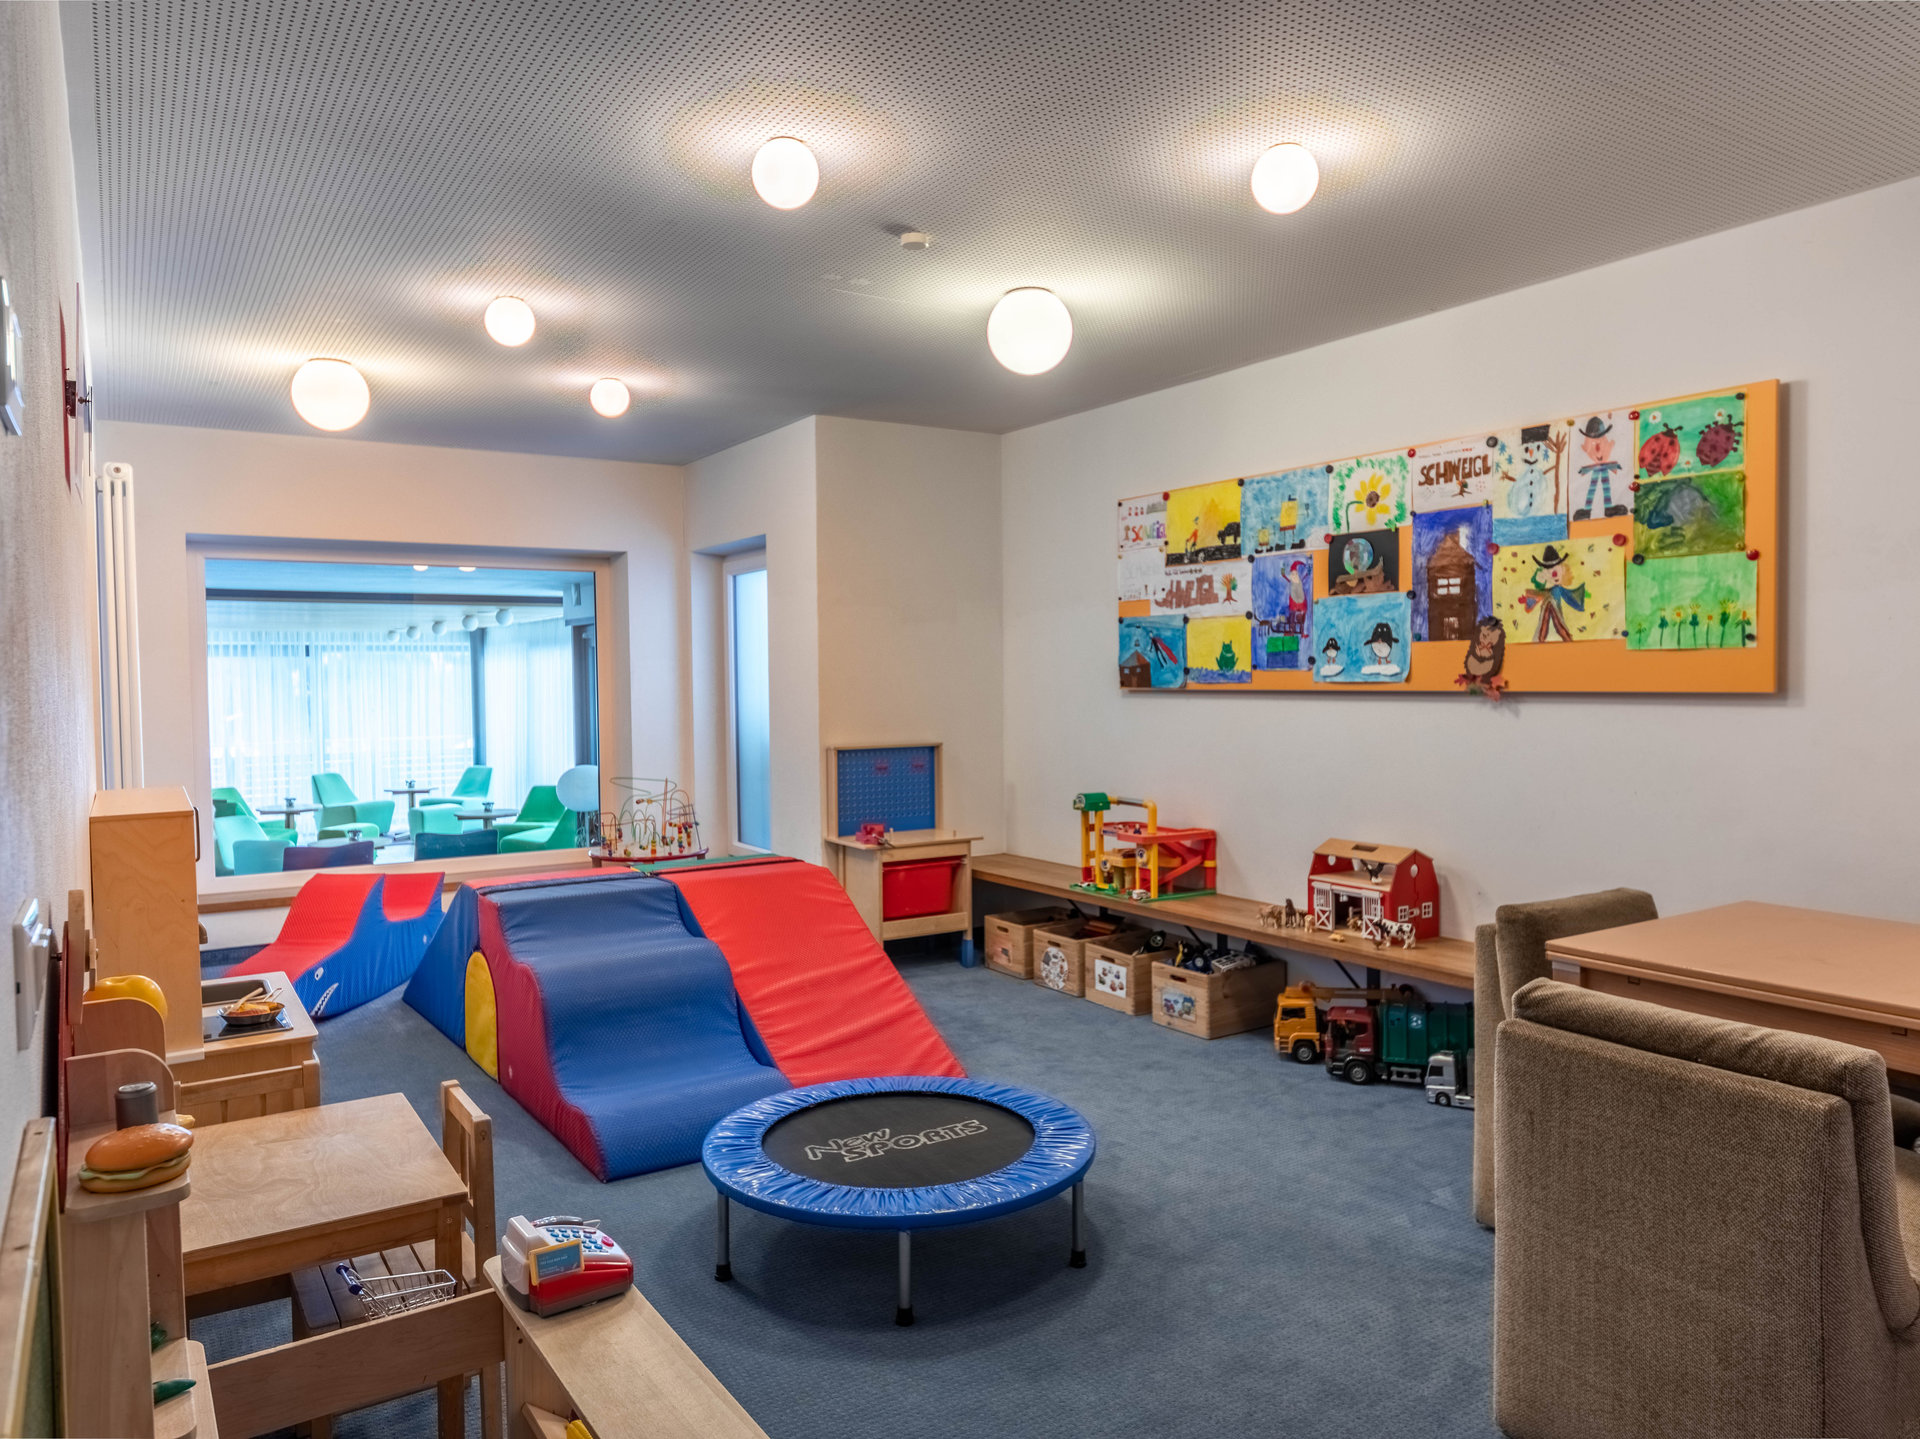 Hotel in Ultental Valley near Merano with childrens playroom, table football, table tennis, Lego, mini kitchen, shop, building blocks, and much more.